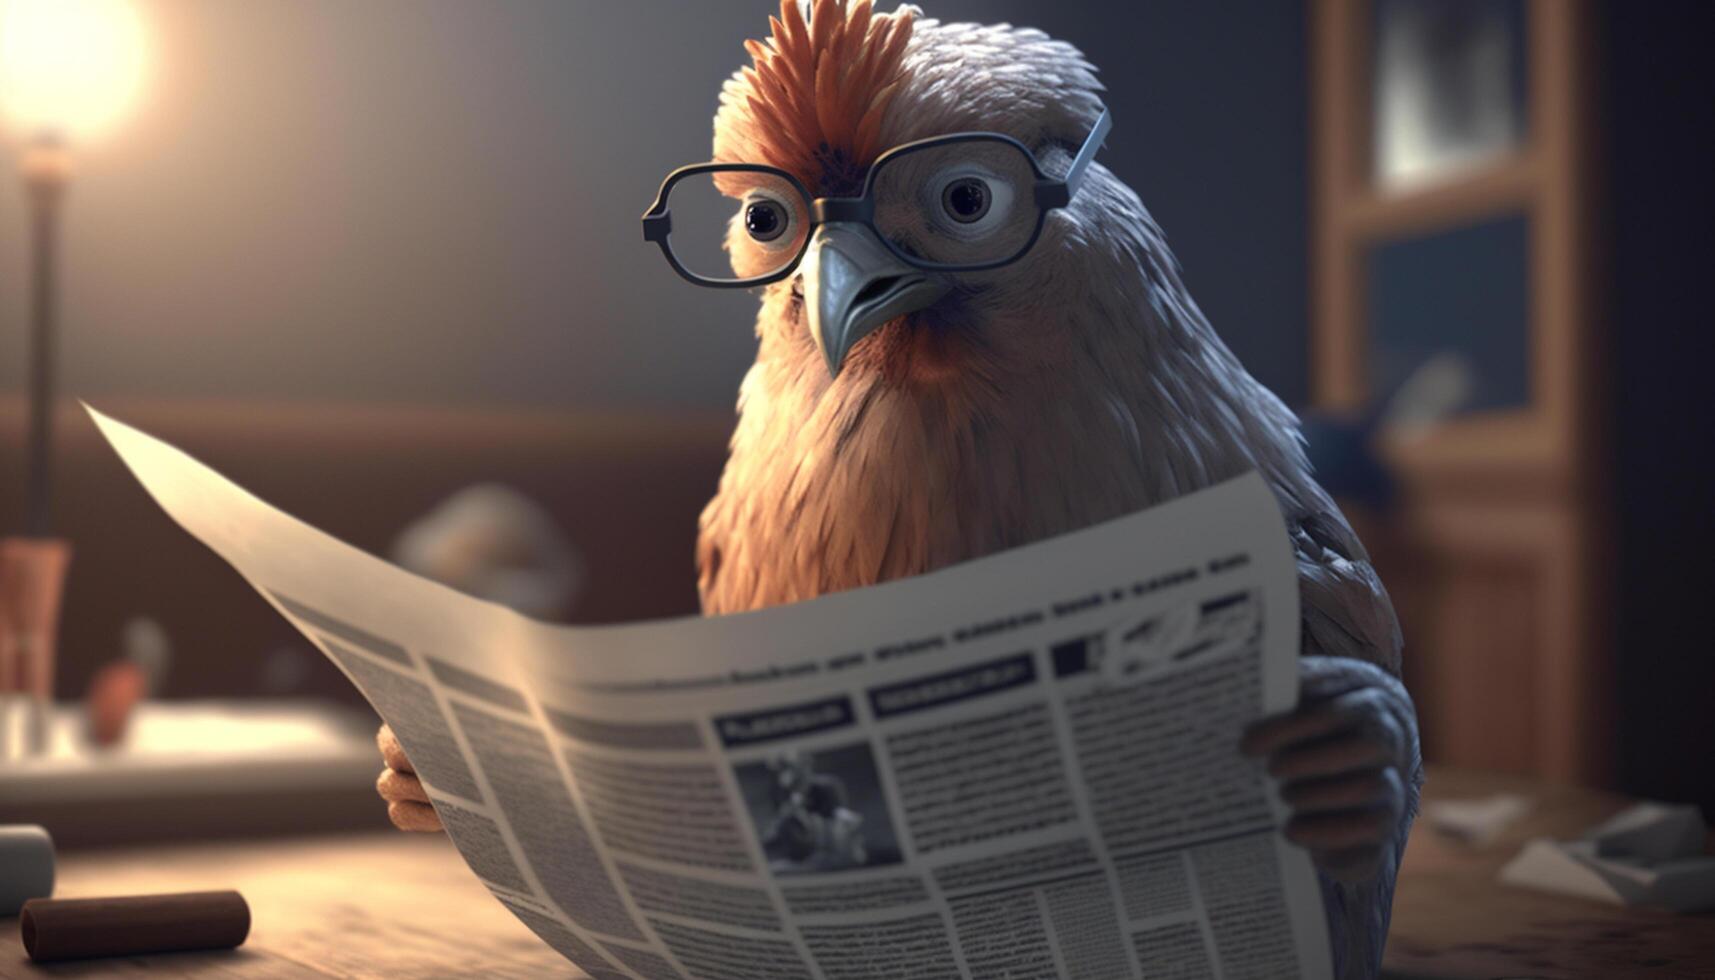 The Smart Chicken Reading the Daily News with Glasses photo